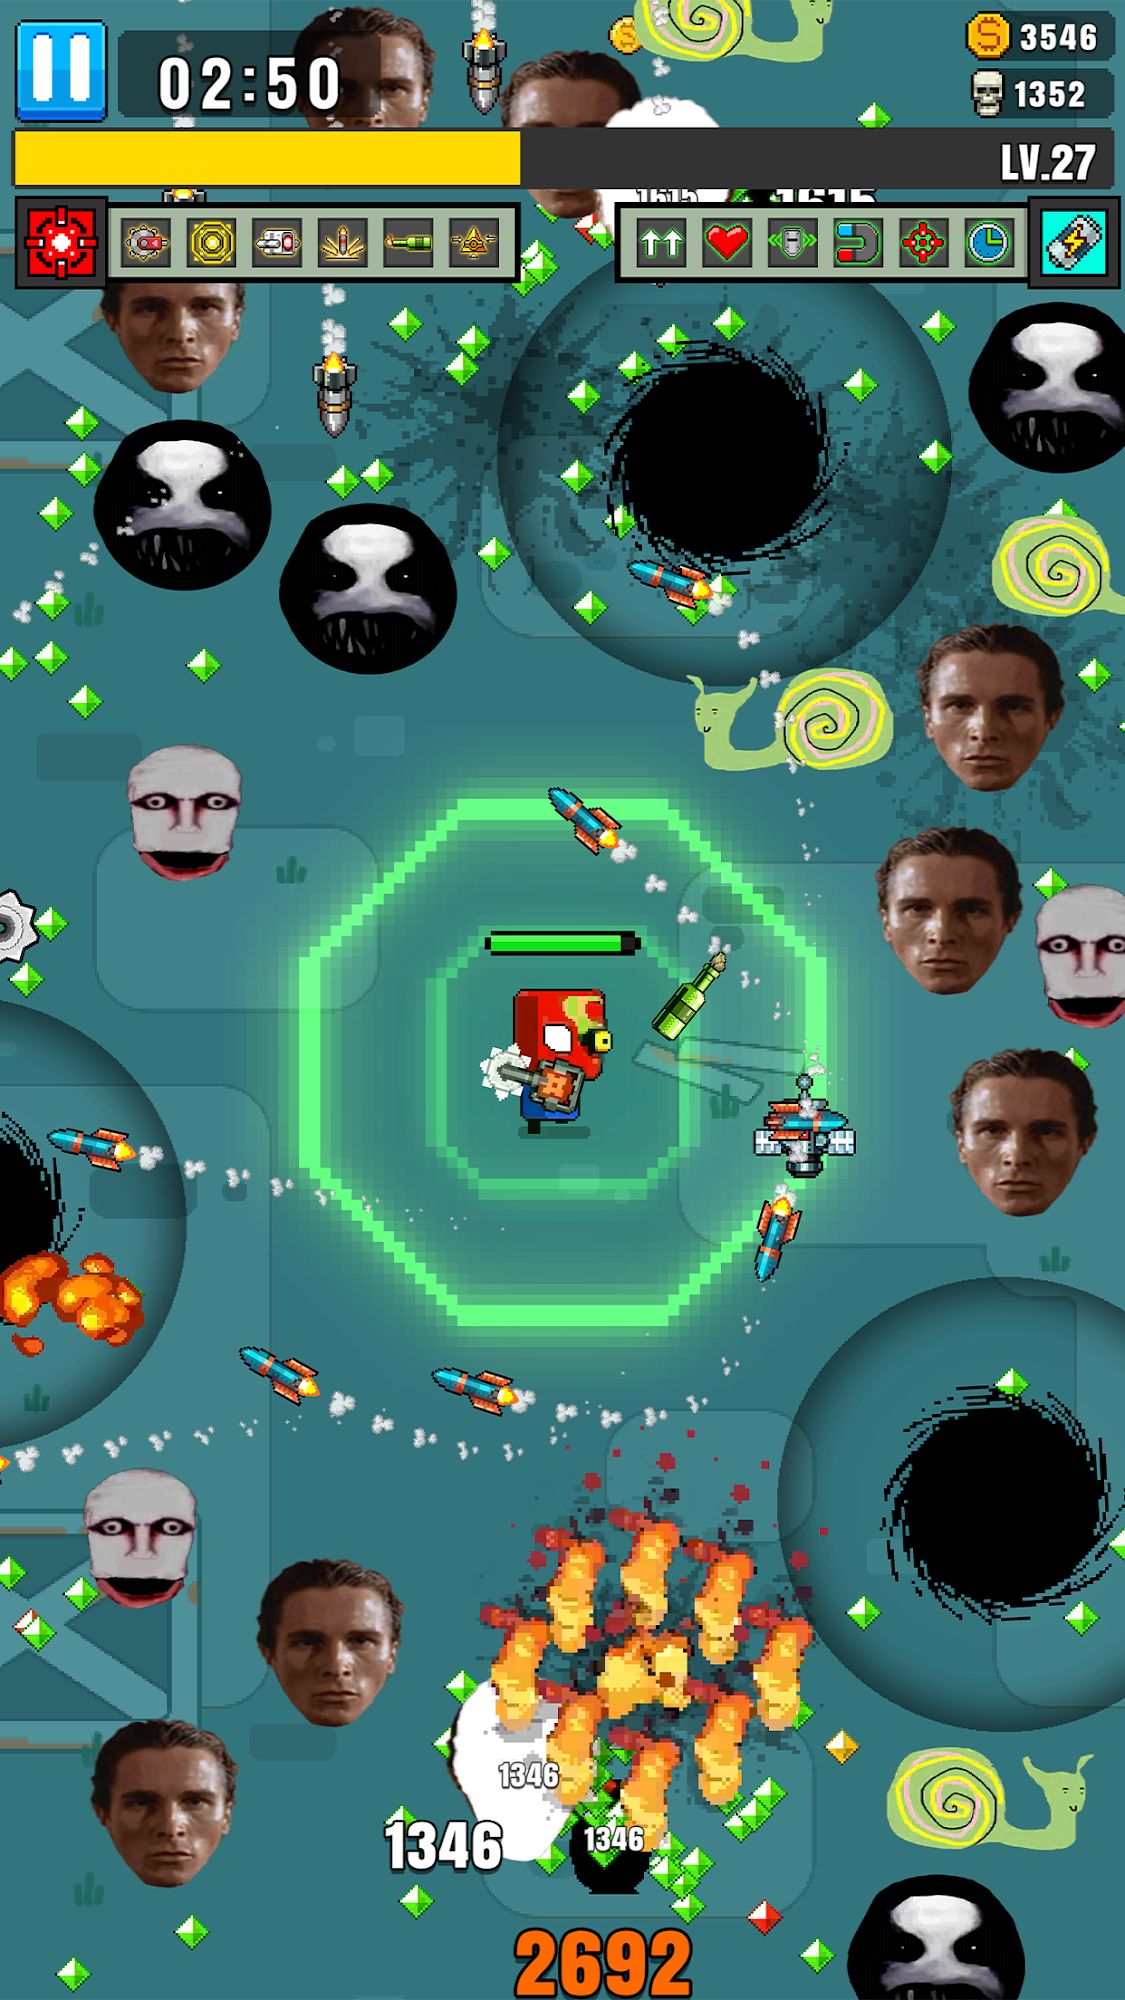 Gameplay of the Nextbot Killer - Land Survival for Android phone or tablet.